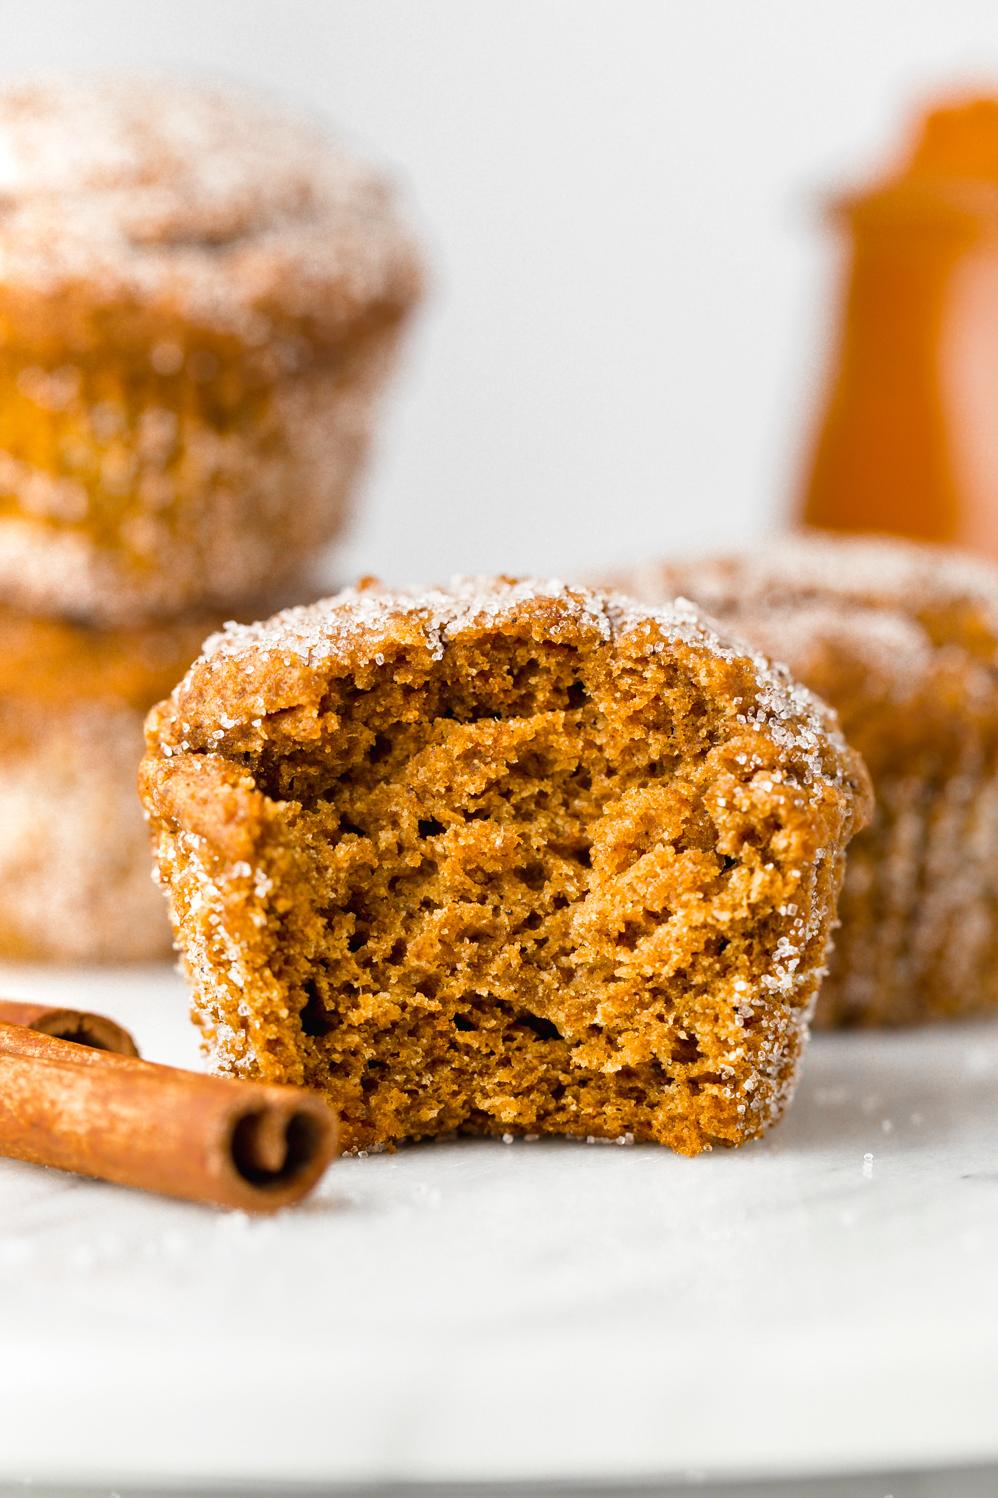  You'll be your own favorite baker once you try this simple pumpkin muffin recipe.